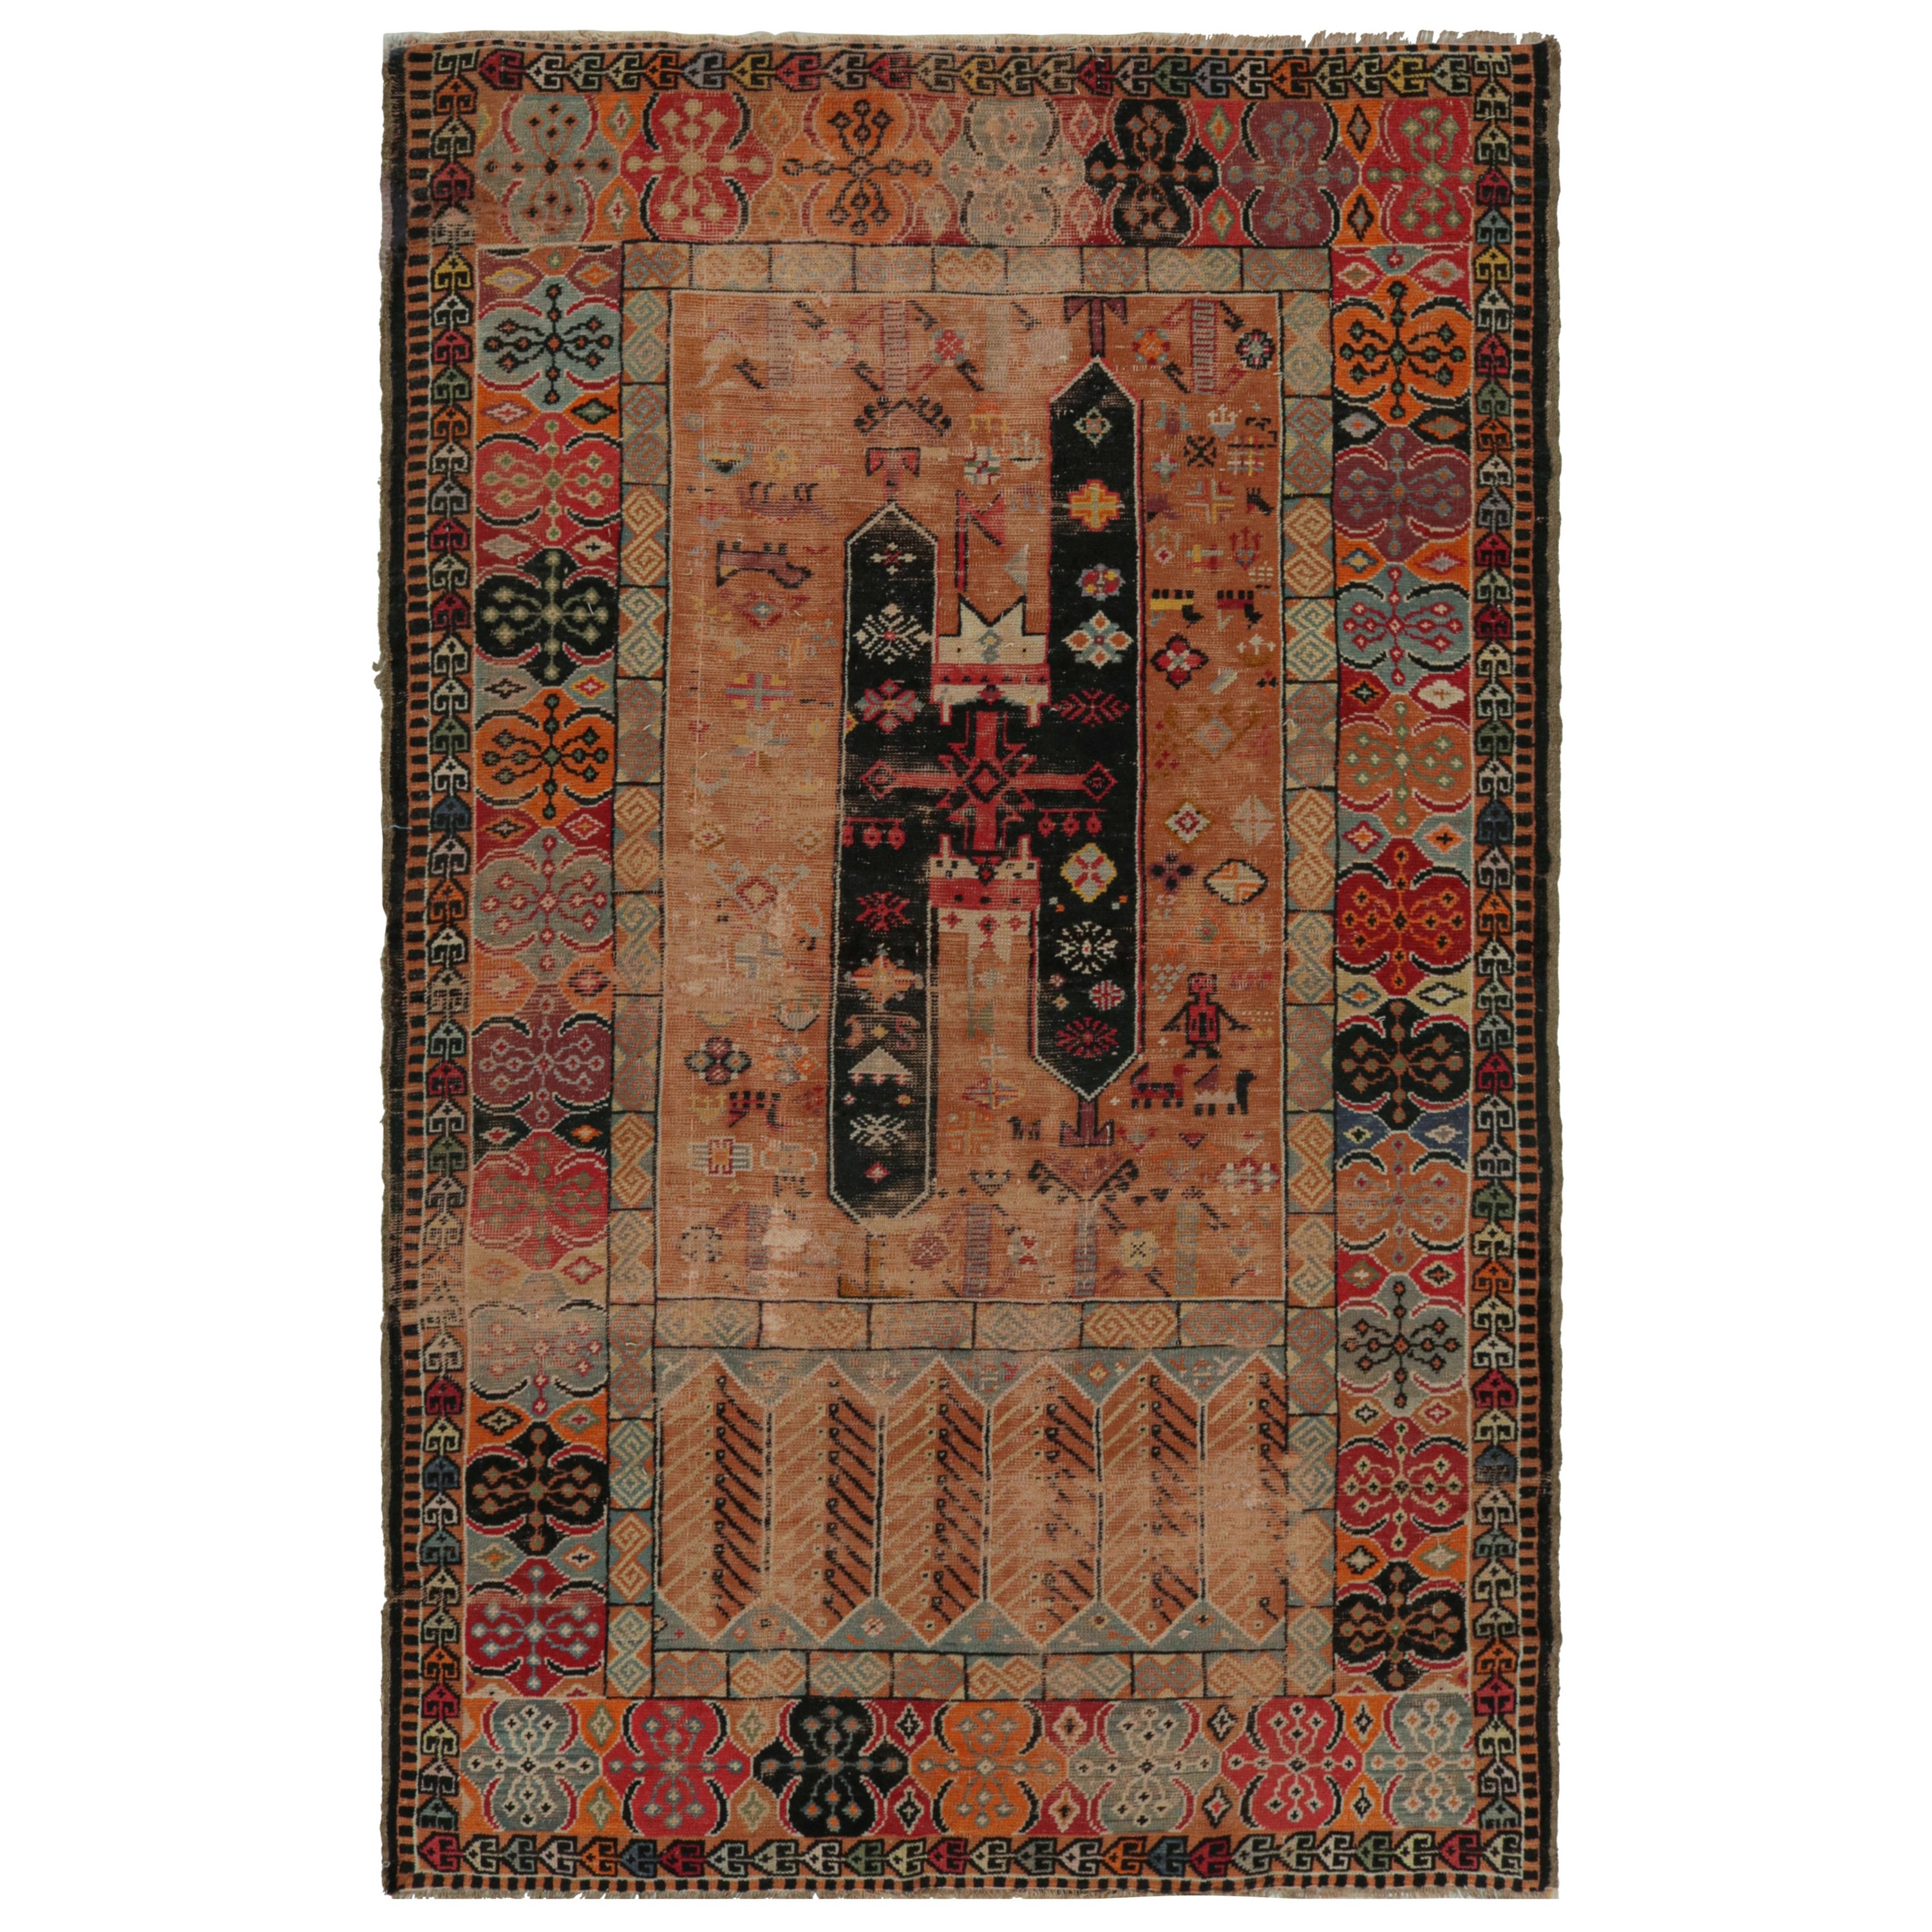 1890s Antique European Rug with Colorful Geometric Patterns, from Rug & Kilim For Sale